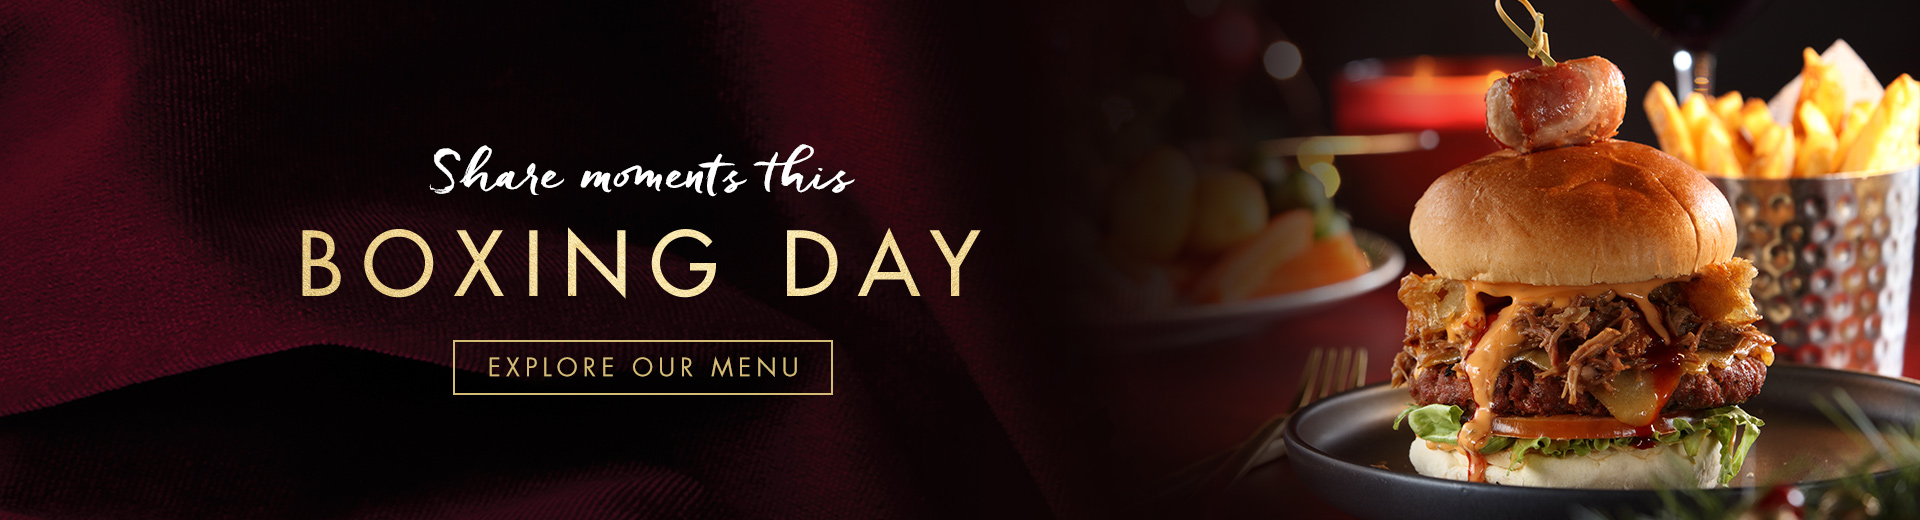 BOXING DAY MENU AT Miller & Carter Cheshire